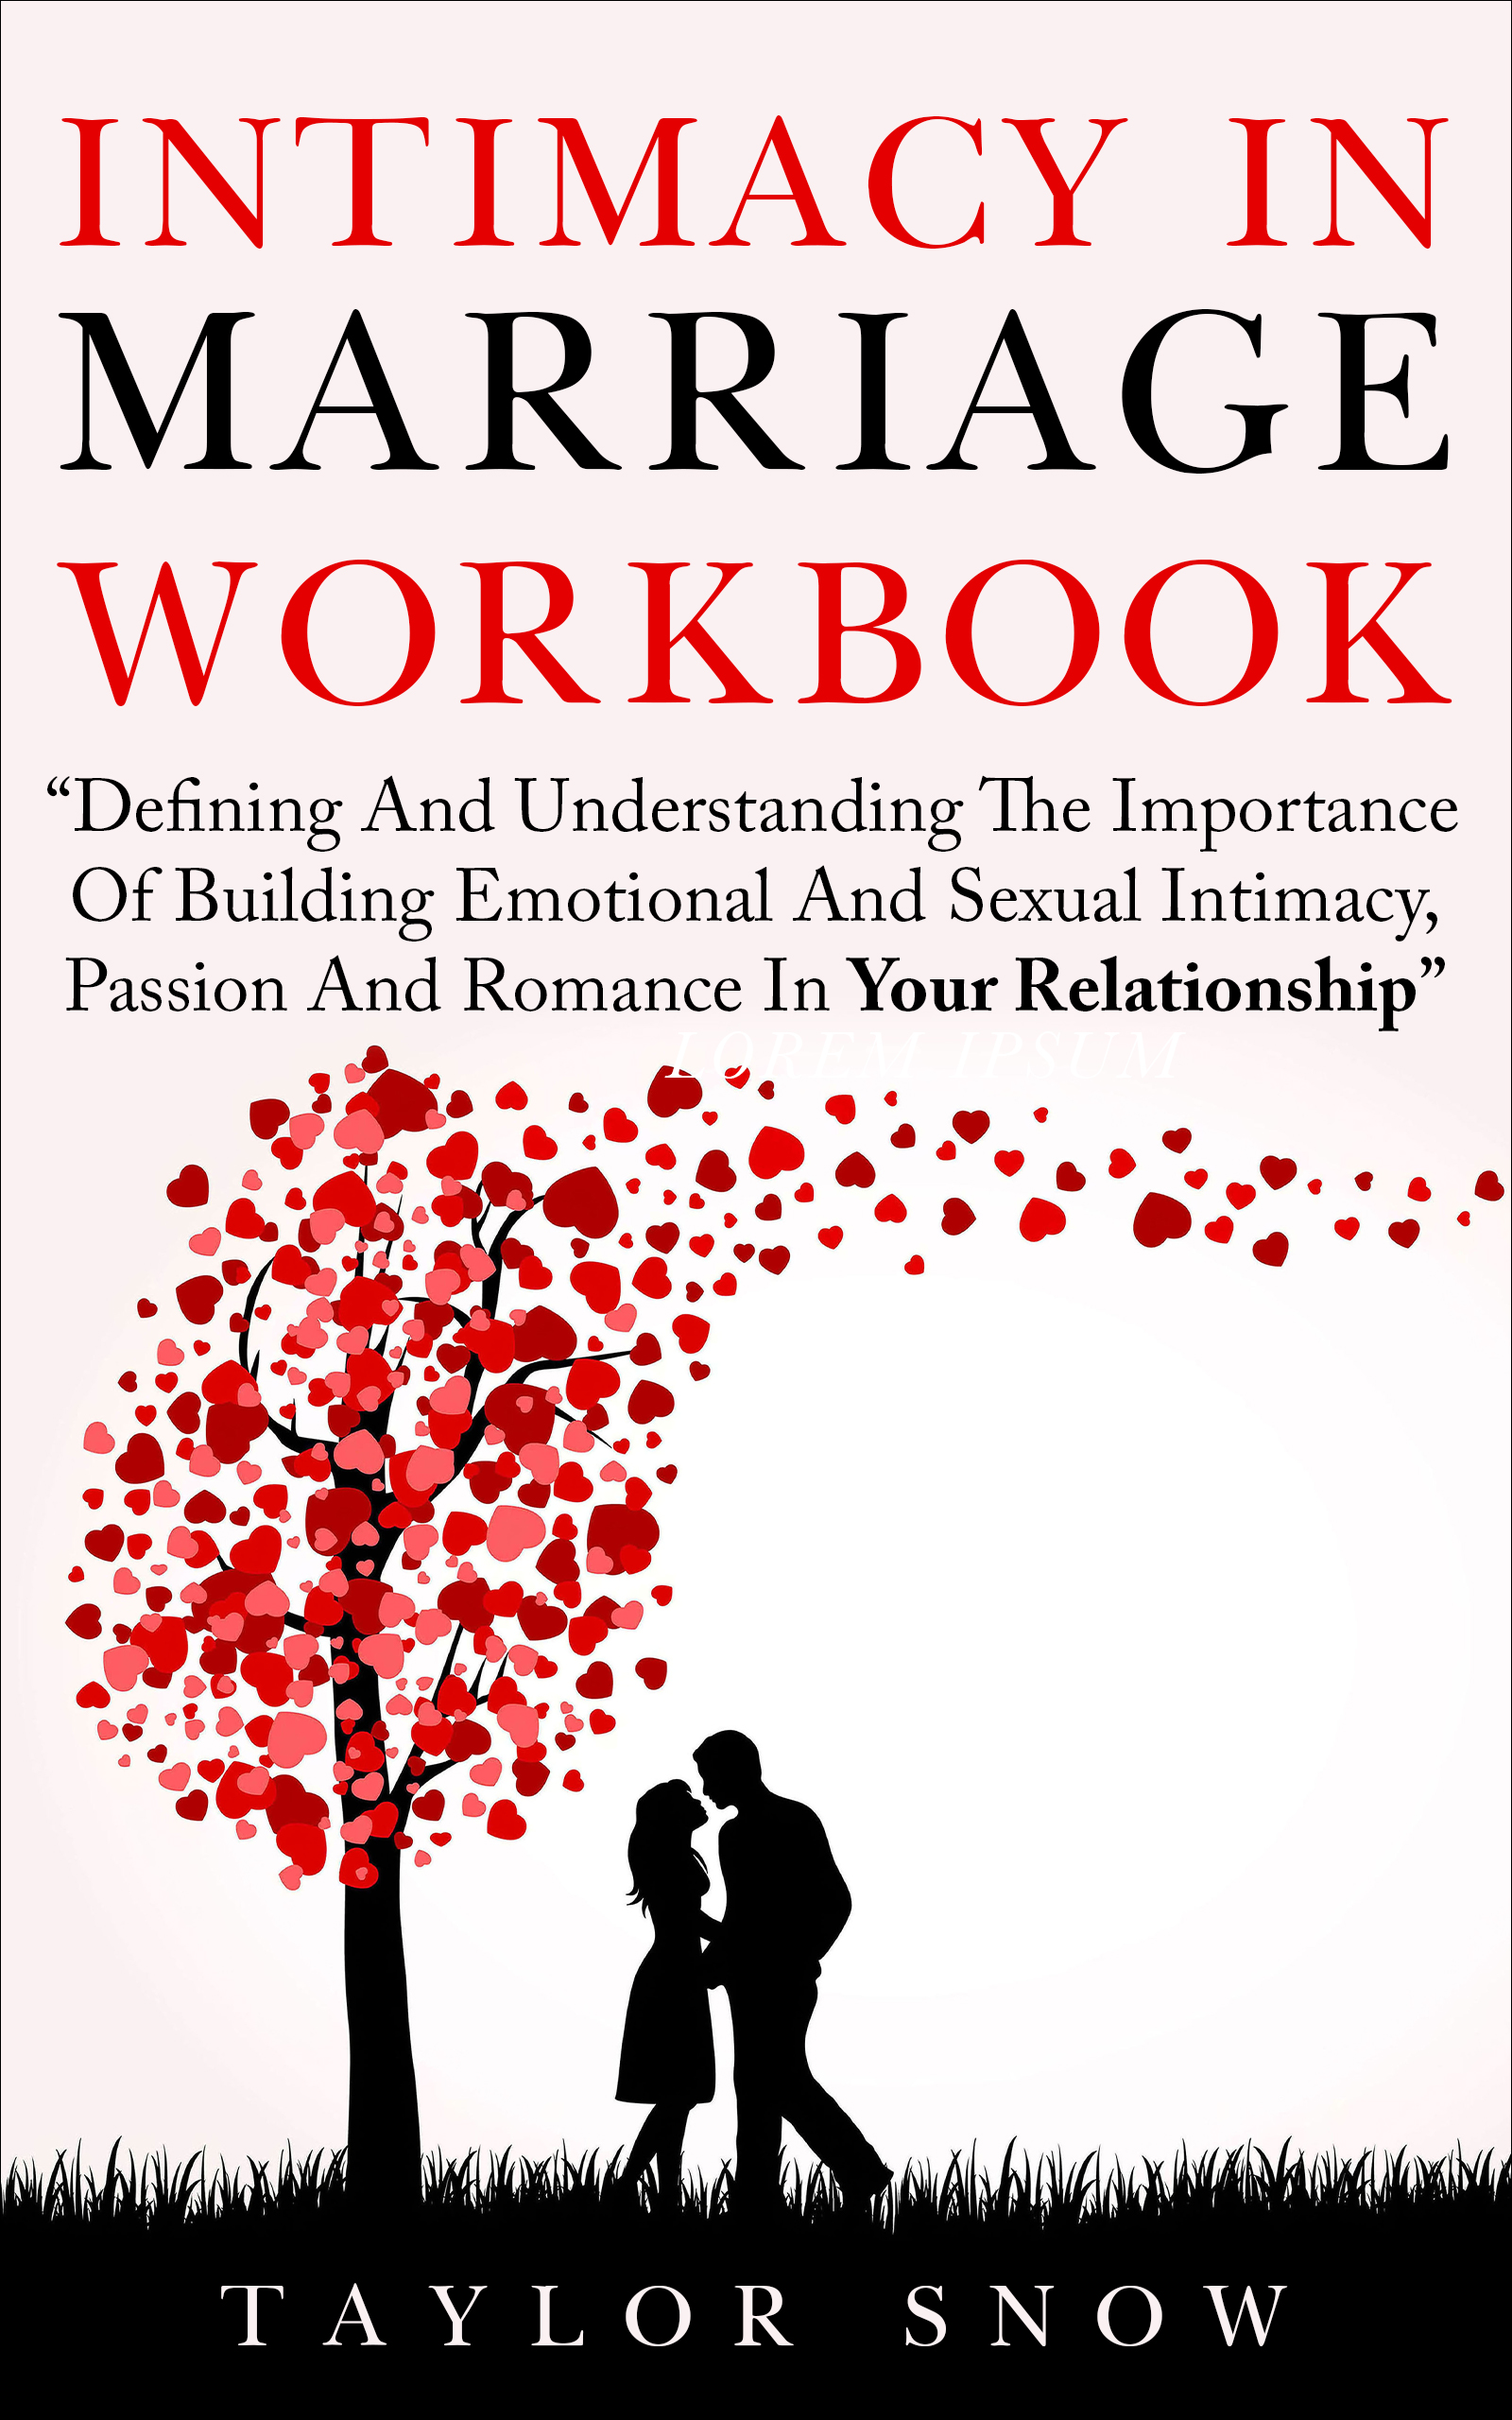 FREE: Intimacy In Marriage Workbook by Taylor Snow